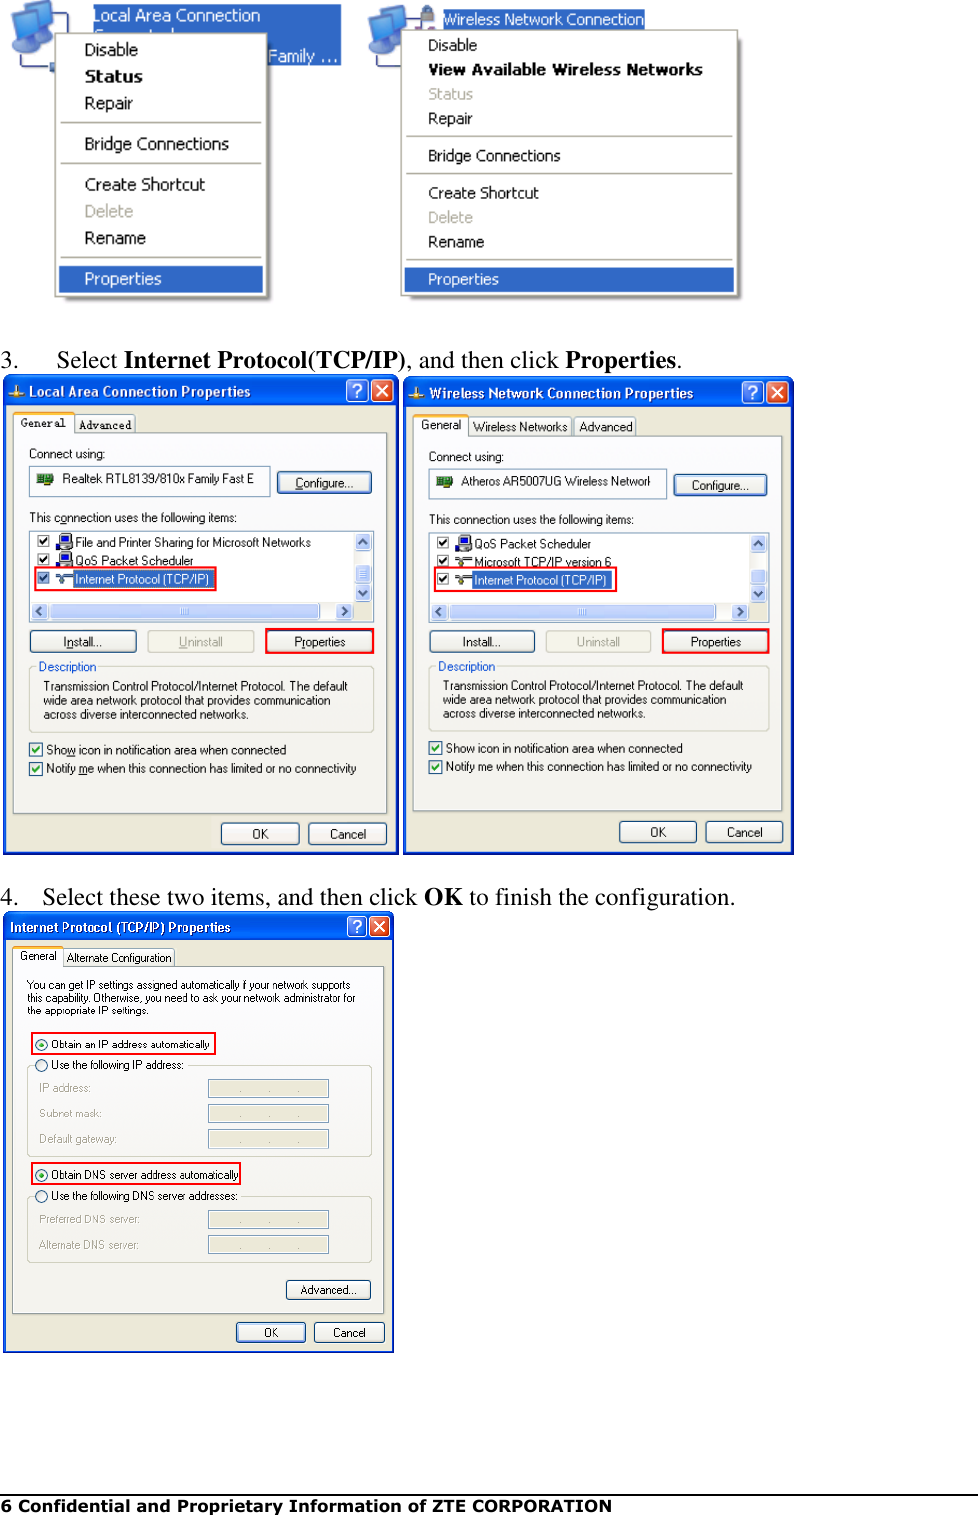   6 Confidential and Proprietary Information of ZTE CORPORATION   3.   Select Internet Protocol(TCP/IP), and then click Properties.   4.   Select these two items, and then click OK to finish the configuration.   